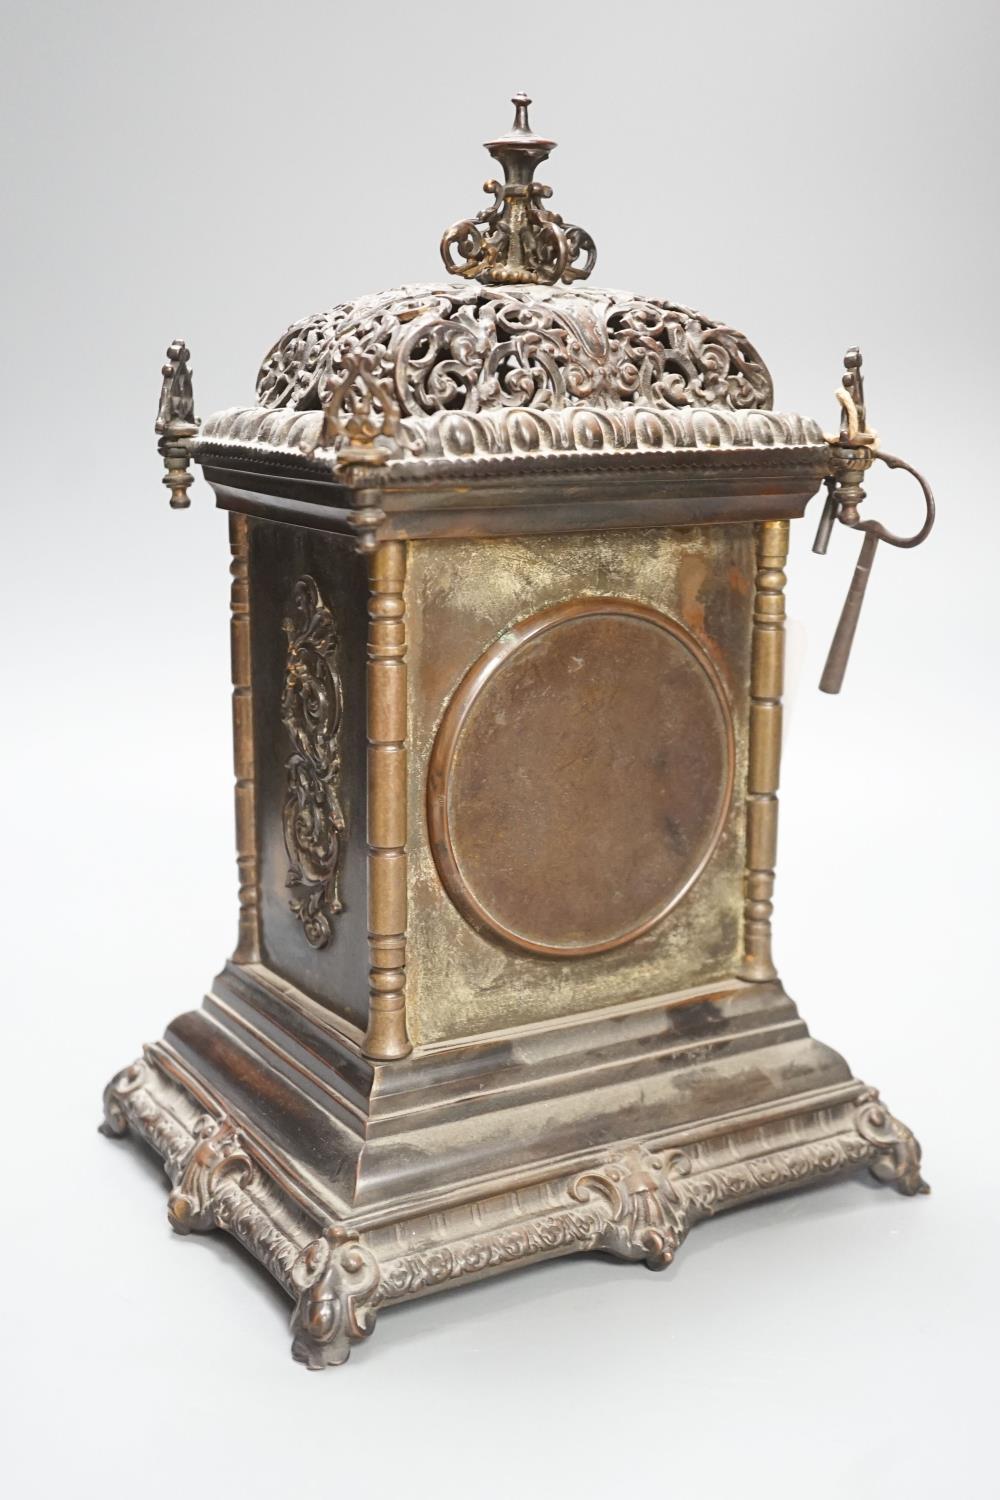 An Edwardian patinated brass mantel clock with key 30cm - Image 4 of 5